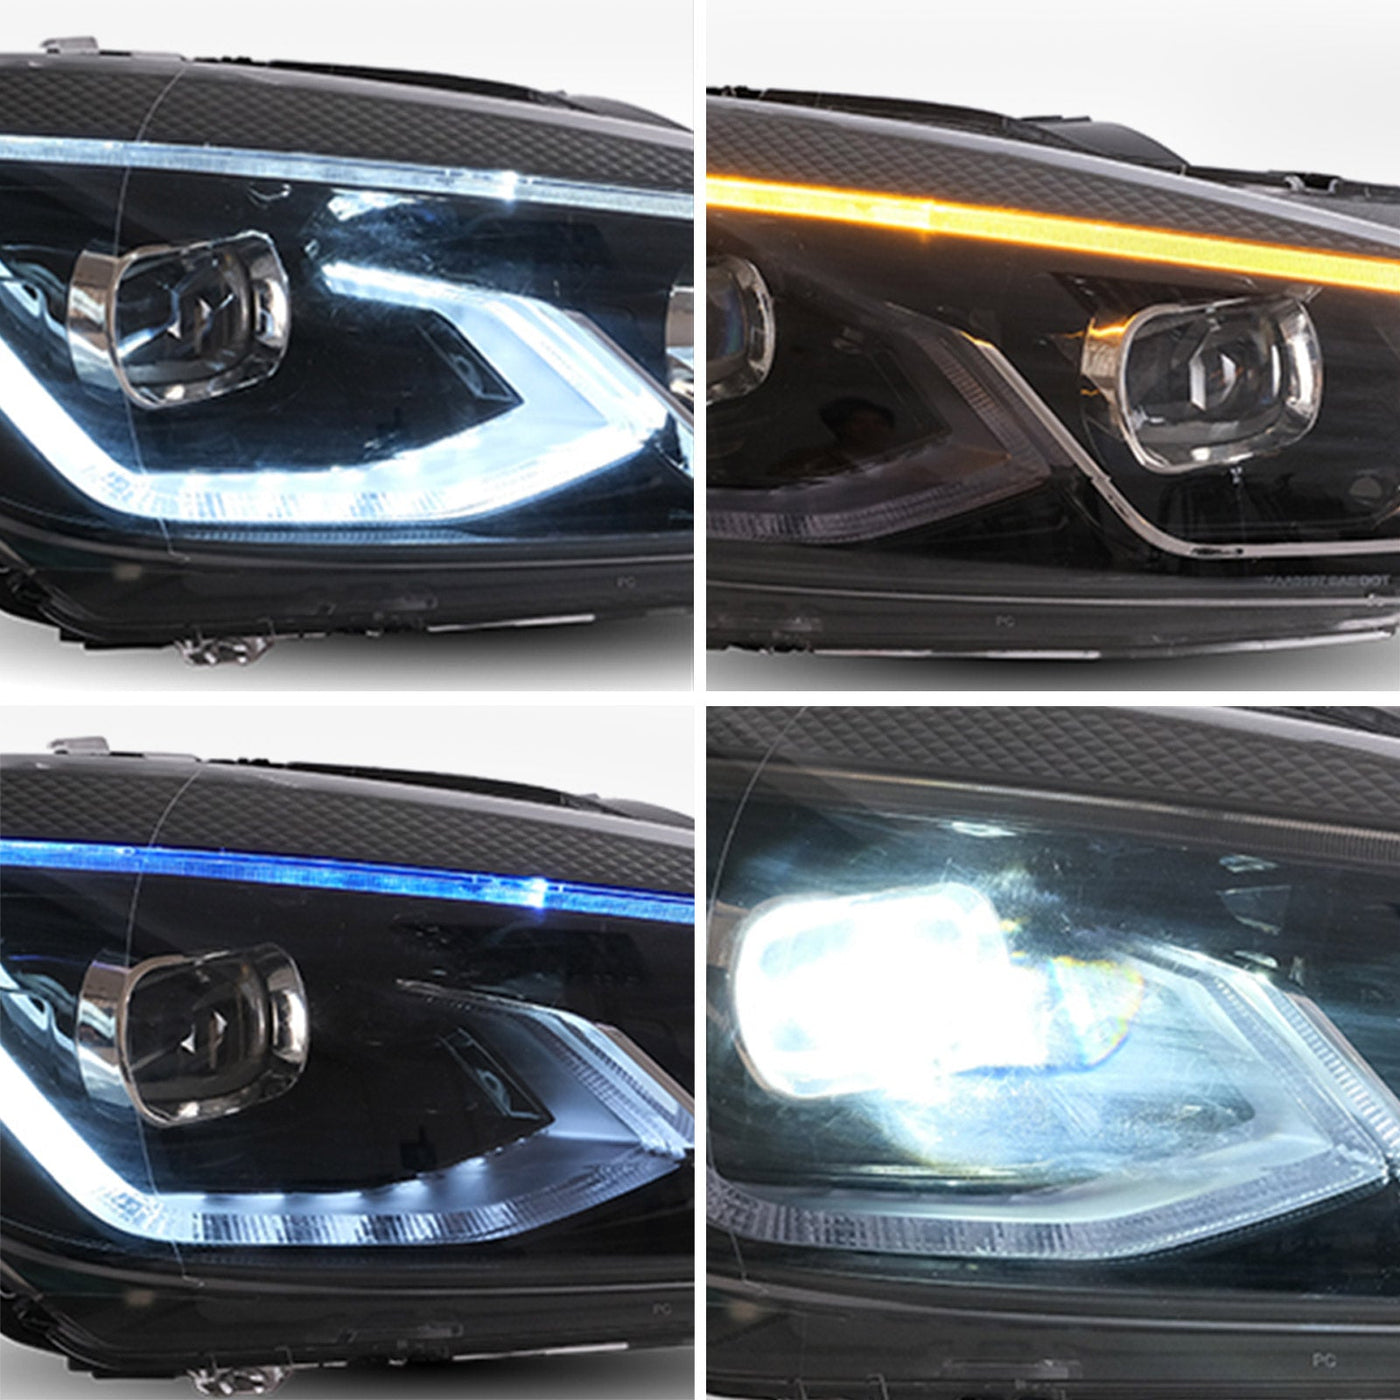 VLAND LED Projector Headlights Head Lamps For Volkswagen VW Golf 6 / MK6 2010-2014 (NOT fit for Golf GTI and Golf R models)